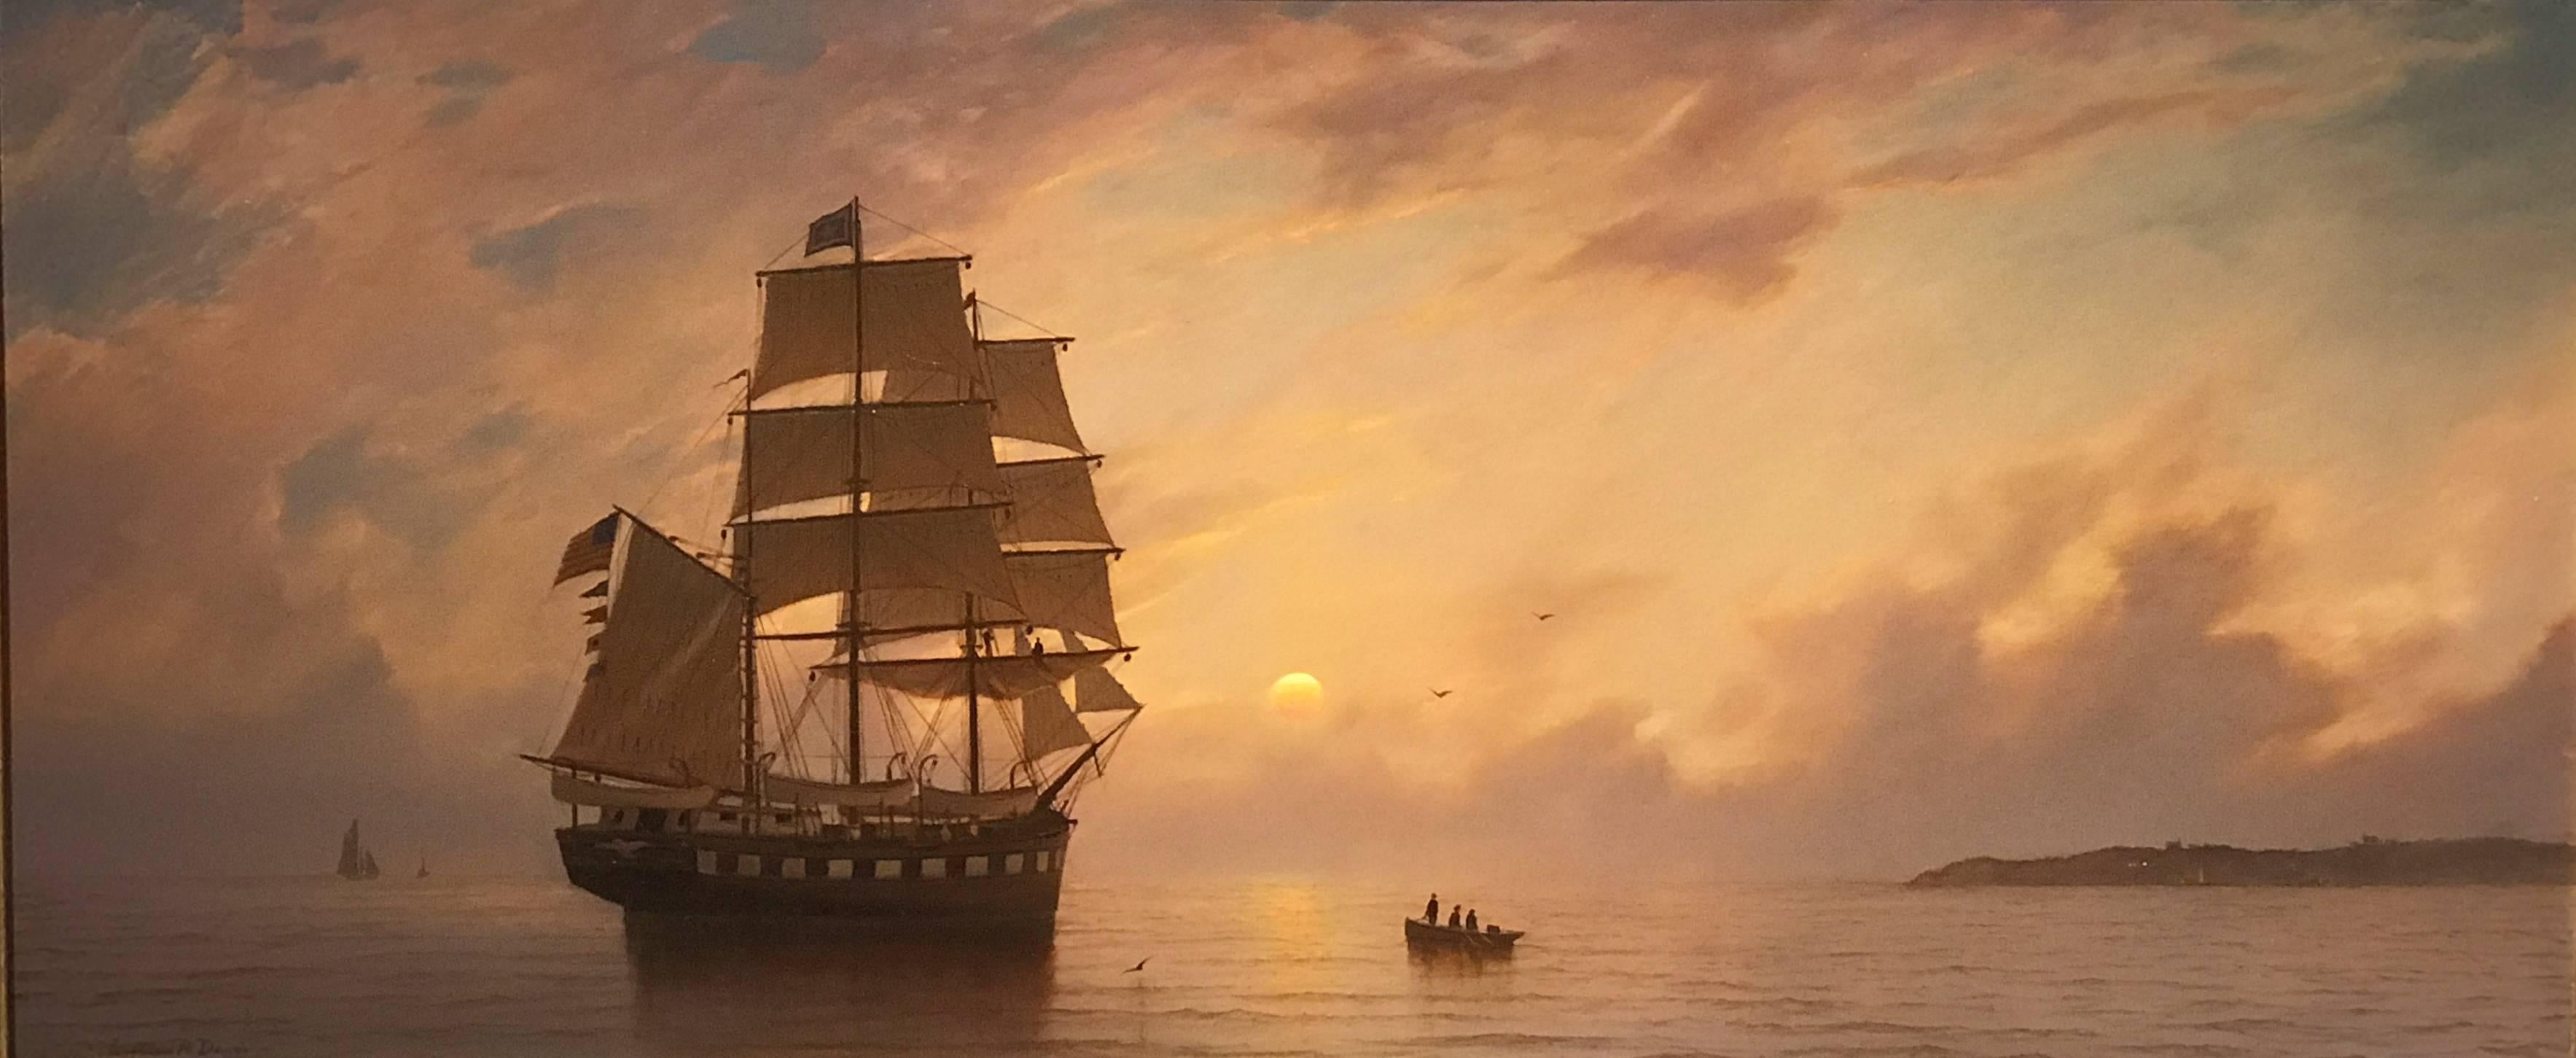 Sunset Rendezvous - Painting by William R. Davis